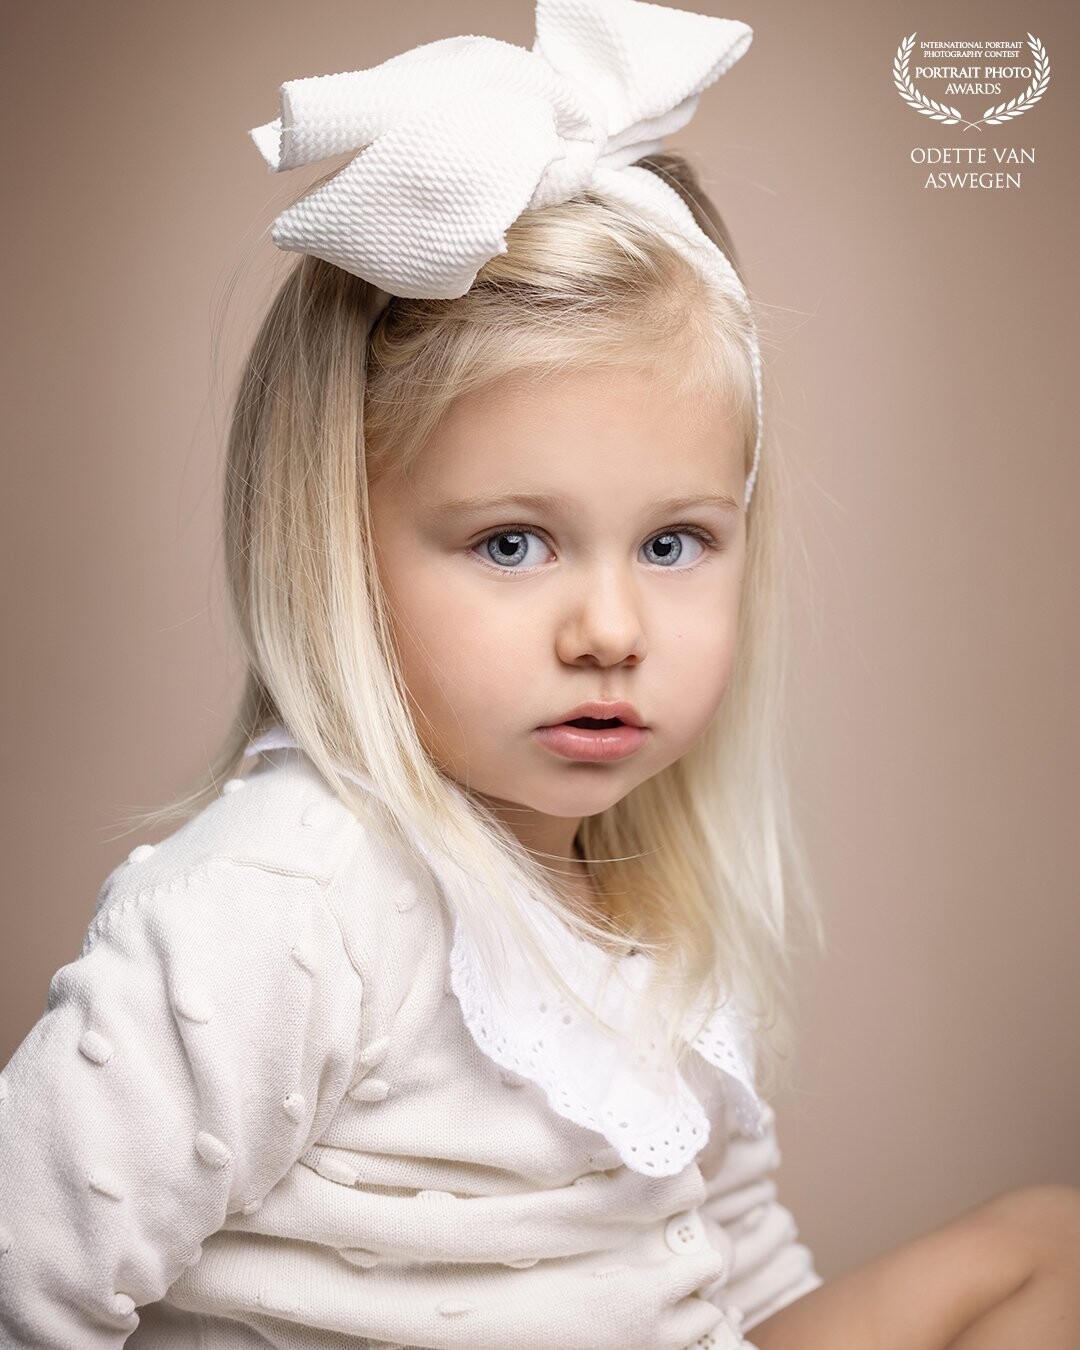 Usually portrait session for children under 3 is a nightmare- but little Hailey was just a real model. My portrait sessions with little ones lasts no longer than 10min, and usually in the first 3 photographs we get the portrait. Equipment used : Canon R5, 50mm Rf and Profoto B1x.